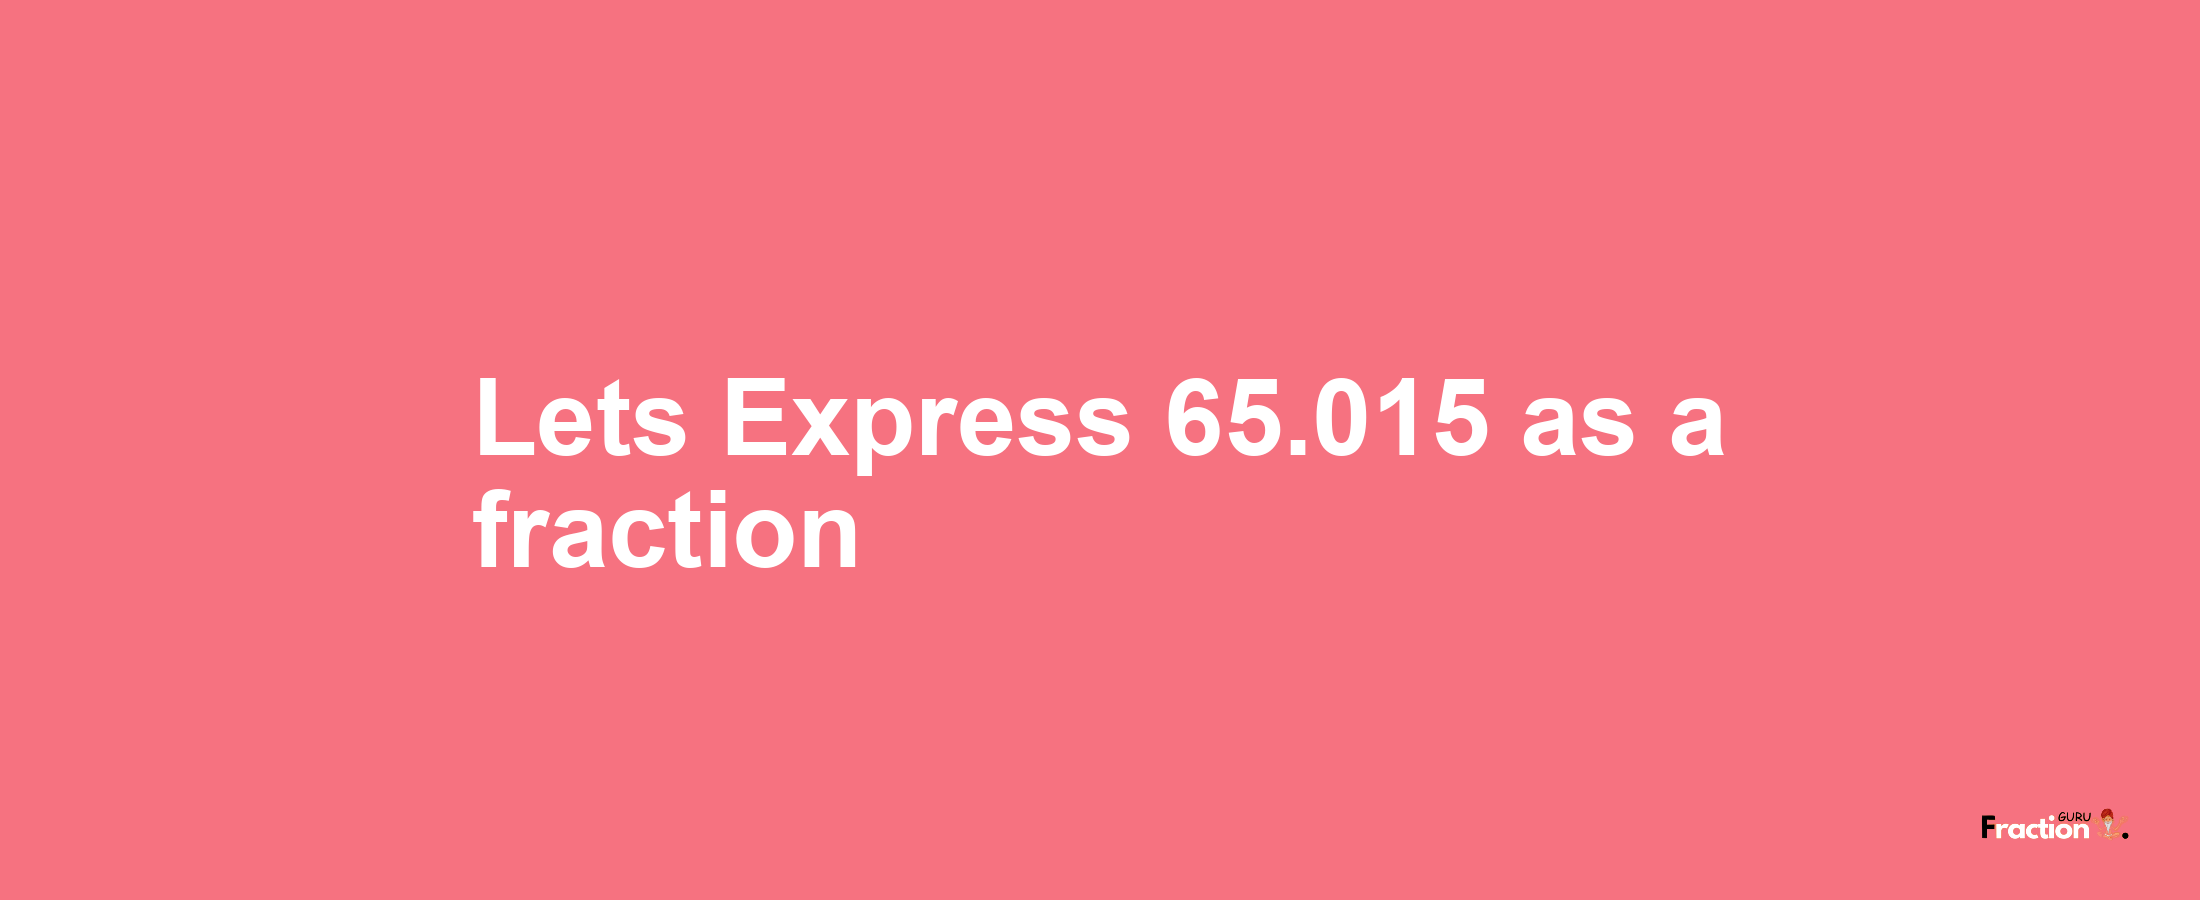 Lets Express 65.015 as afraction